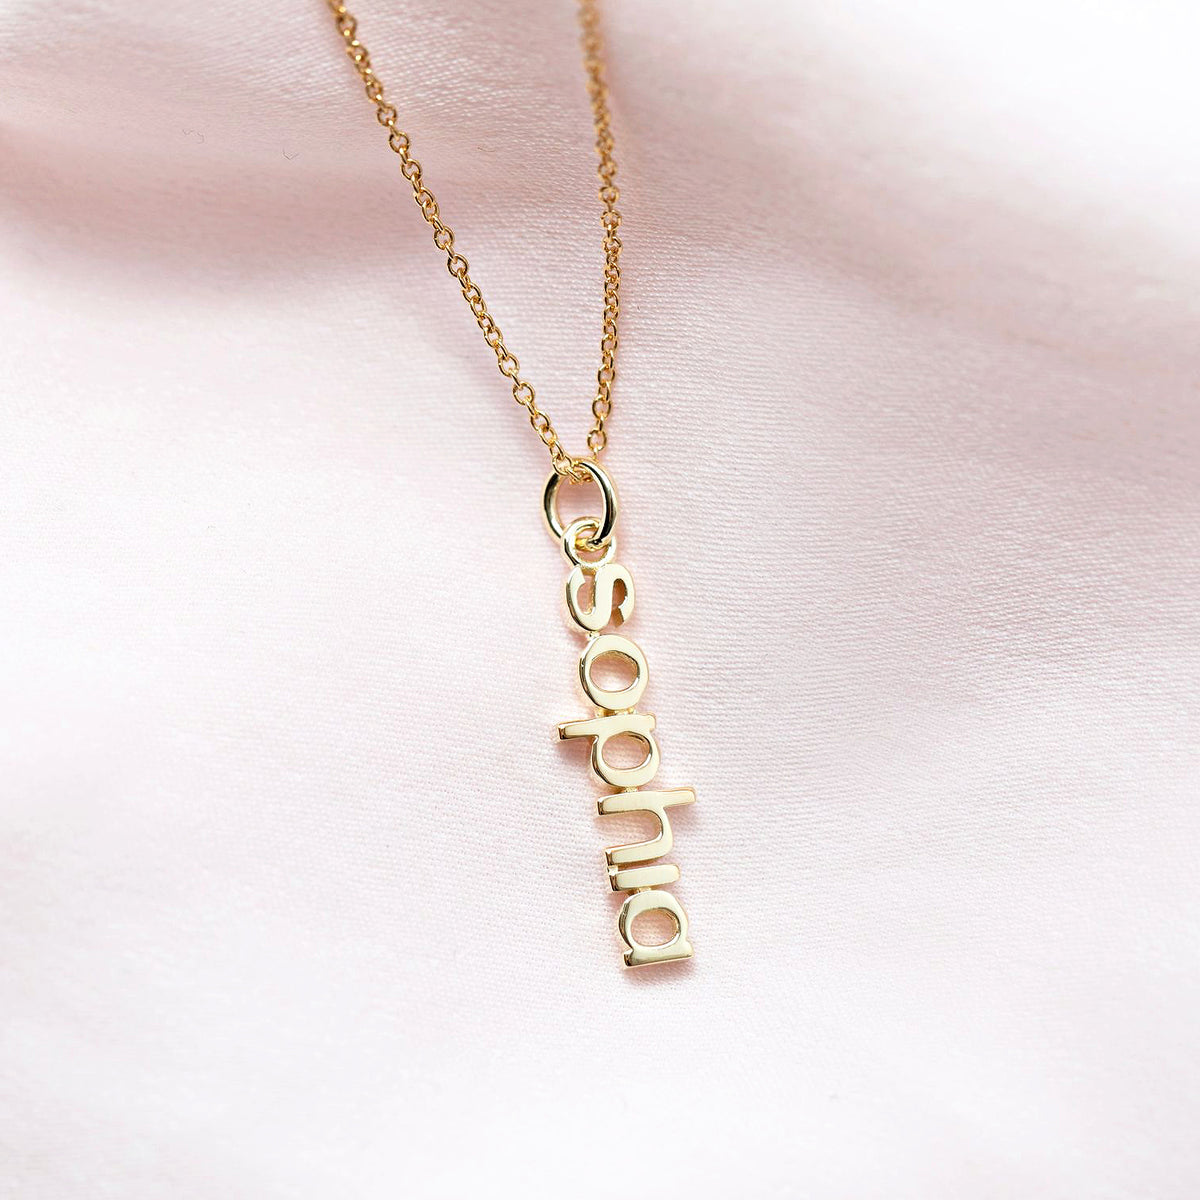 18K Gold Vermeil Nameplate Necklace With Chain Link